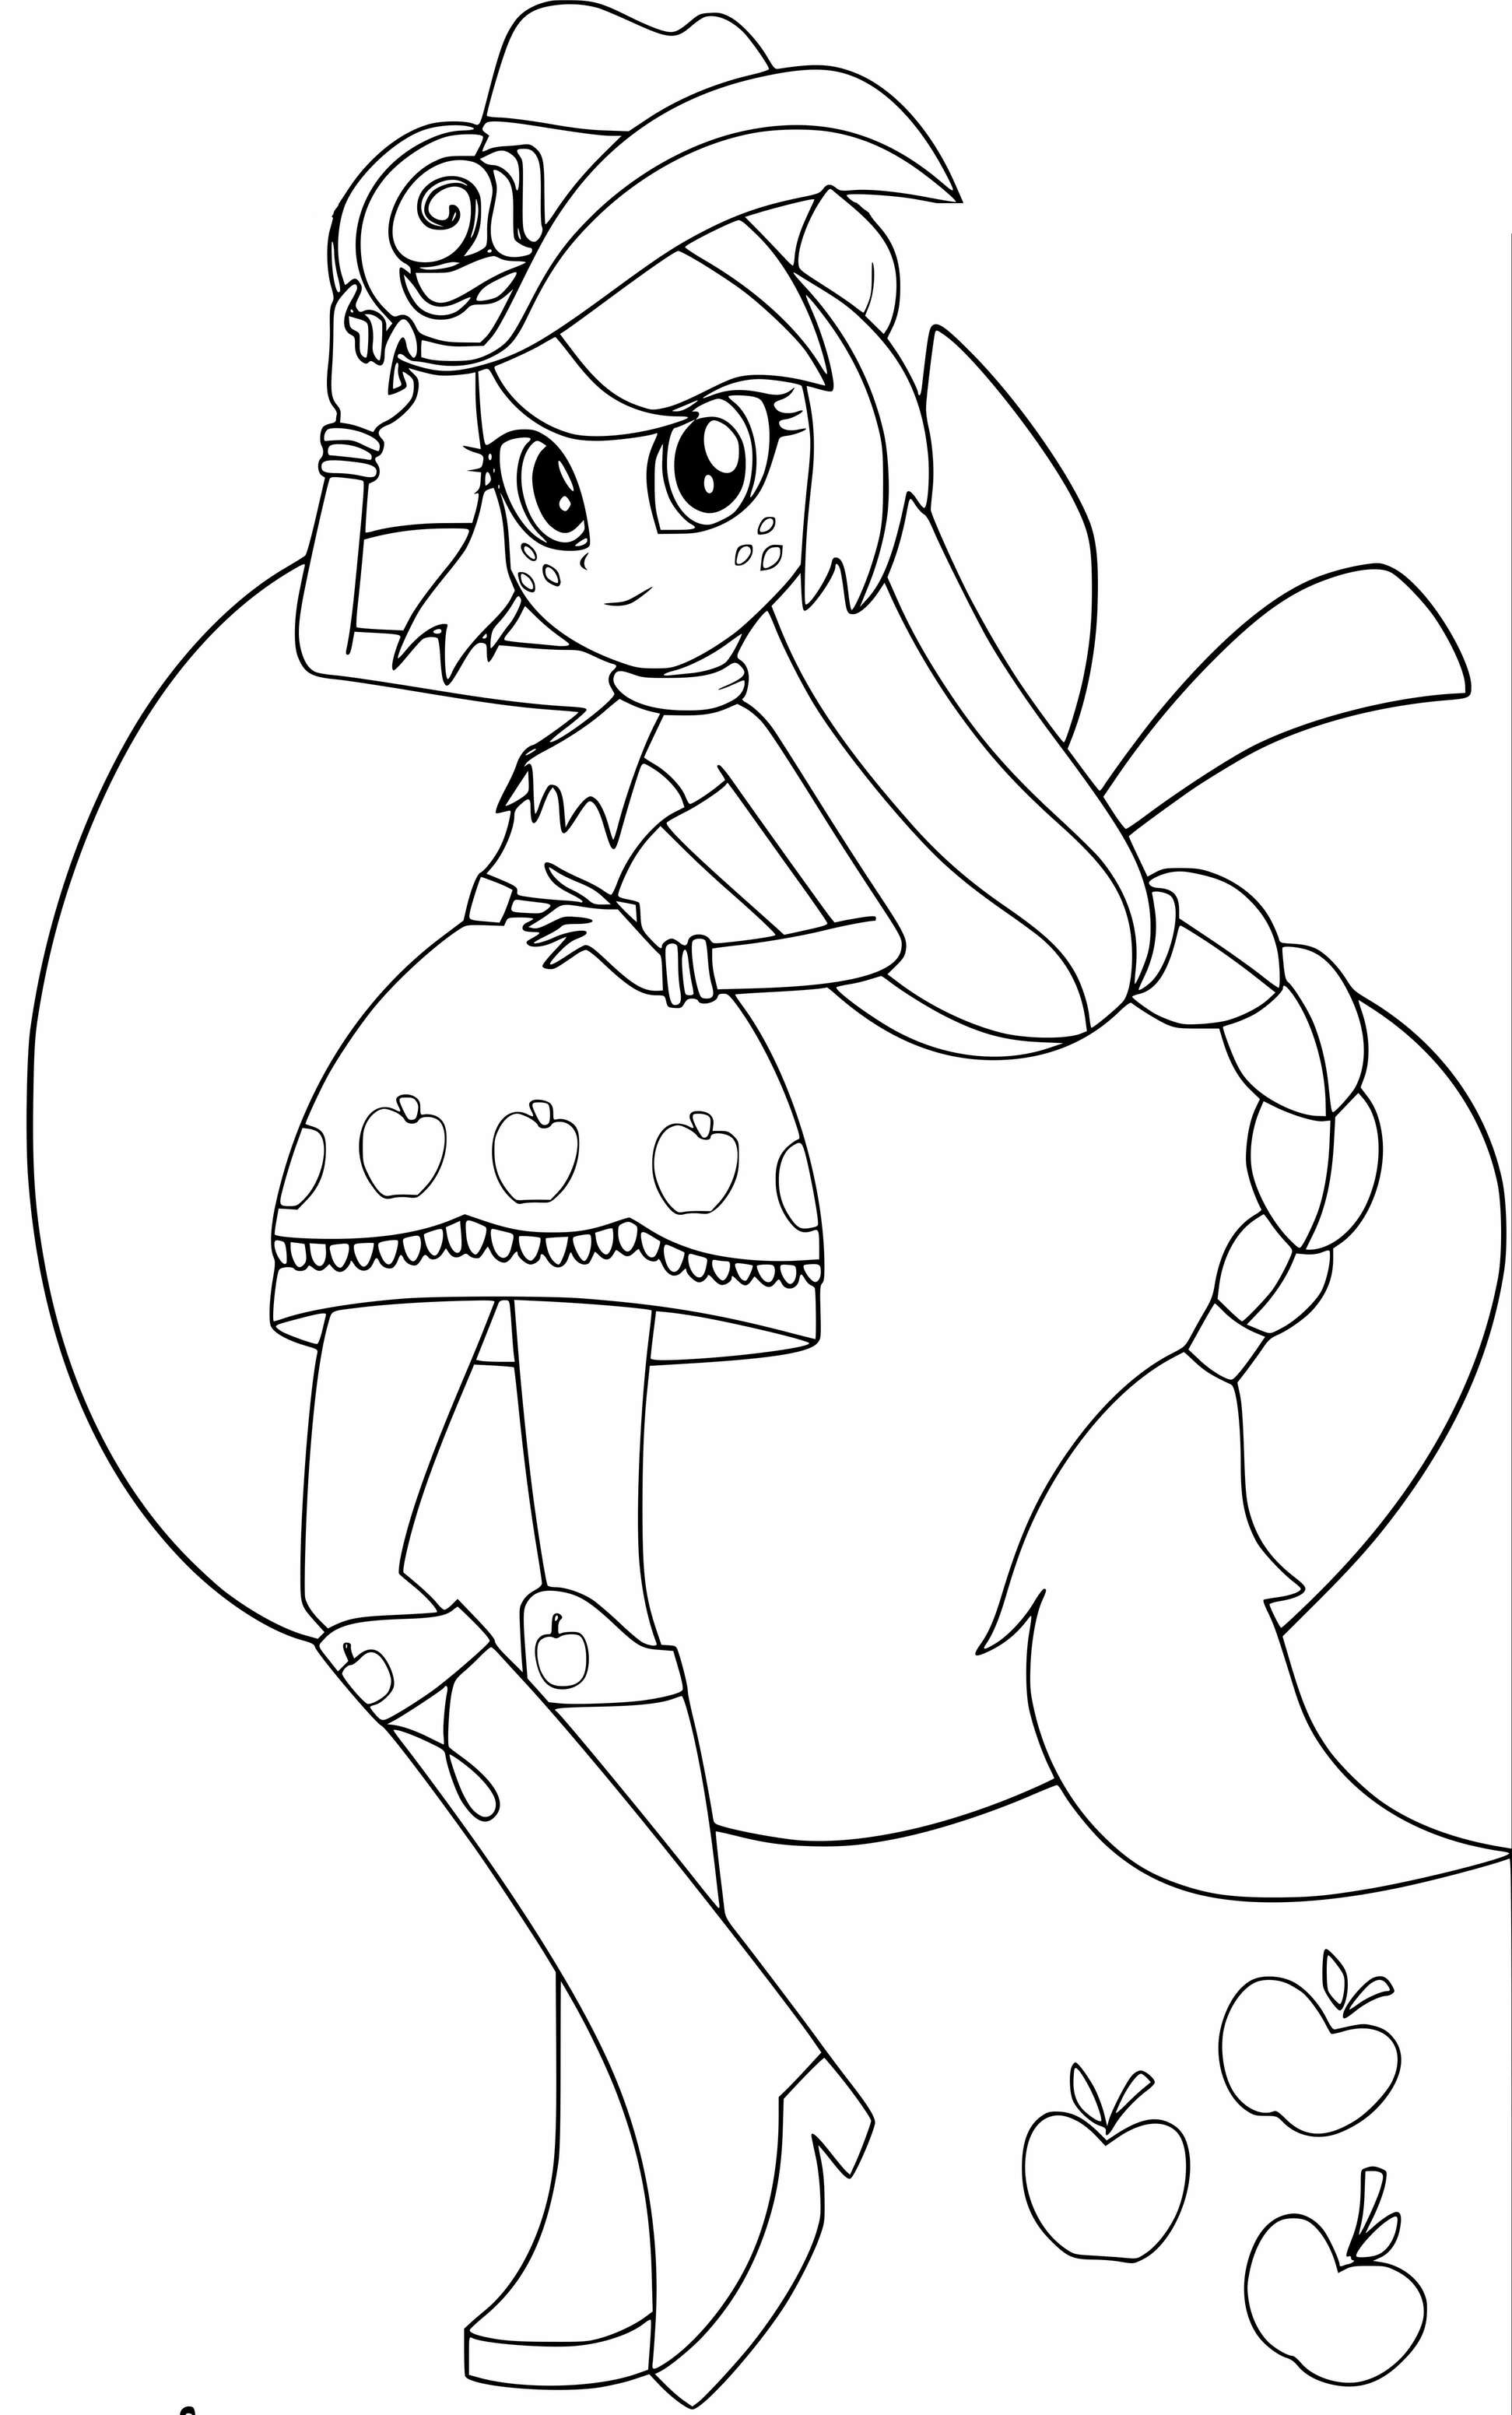 rarity-in-equestria-girls-coloring-pages-coloring-cool